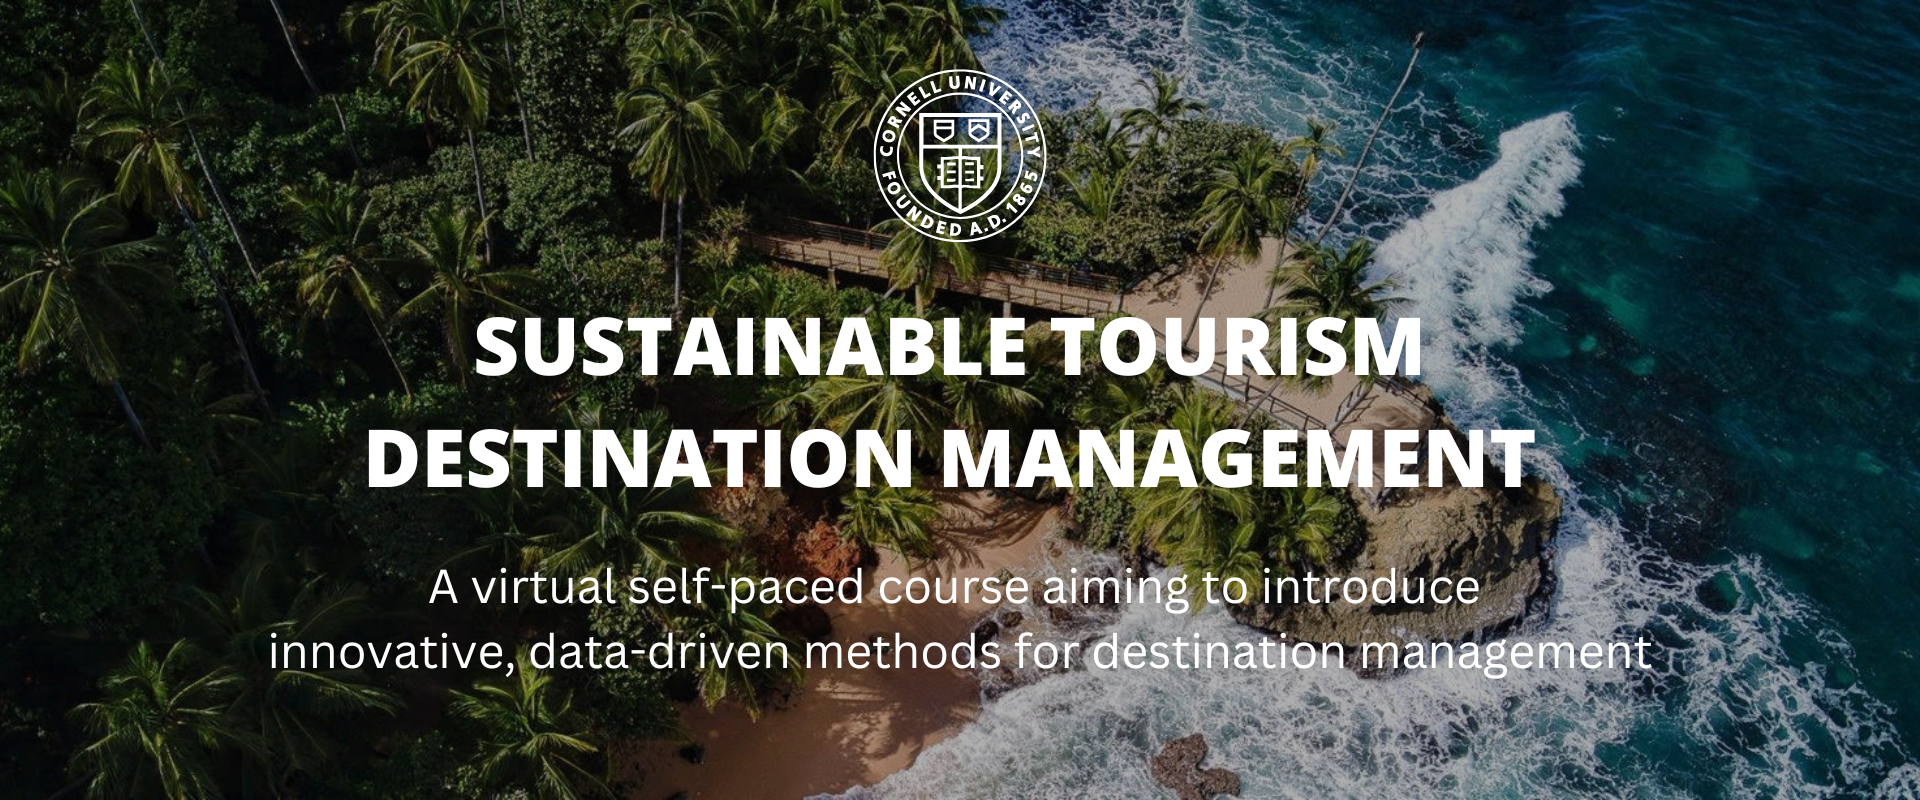 Sustainable Tourism Destination Management Course from Cornell STAMP